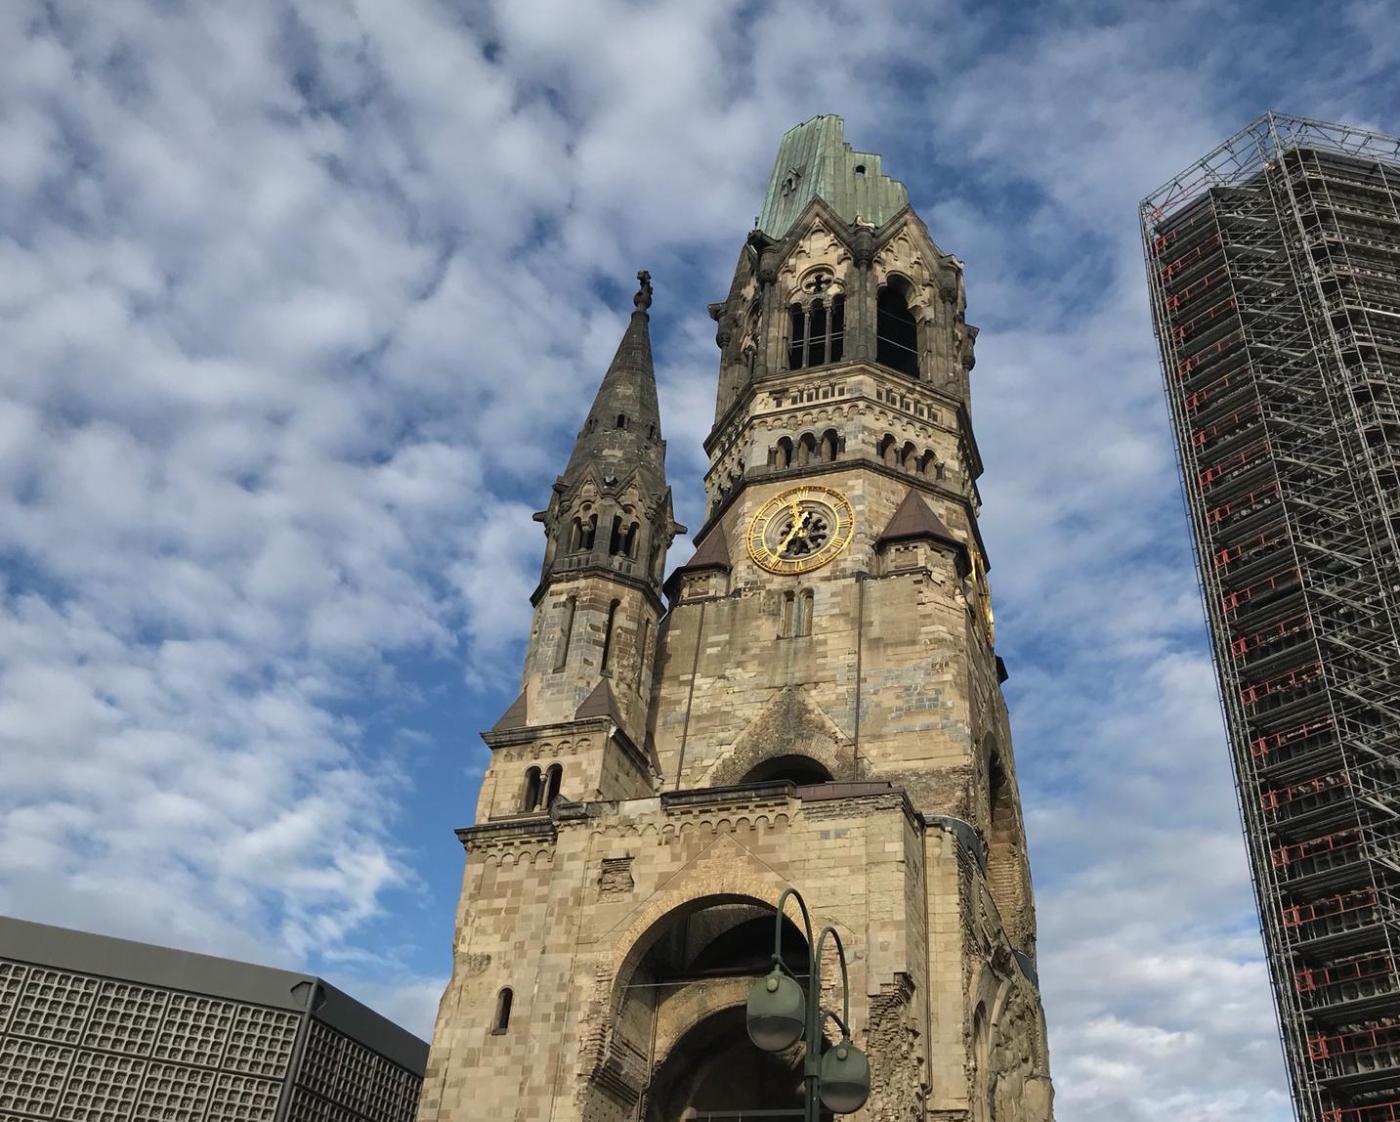 Kaiser Wilhelm Memorial Church in Berlin will ring its bells on Sunday for Remembrance 100. Photo: Ivars Kupcis/WCC